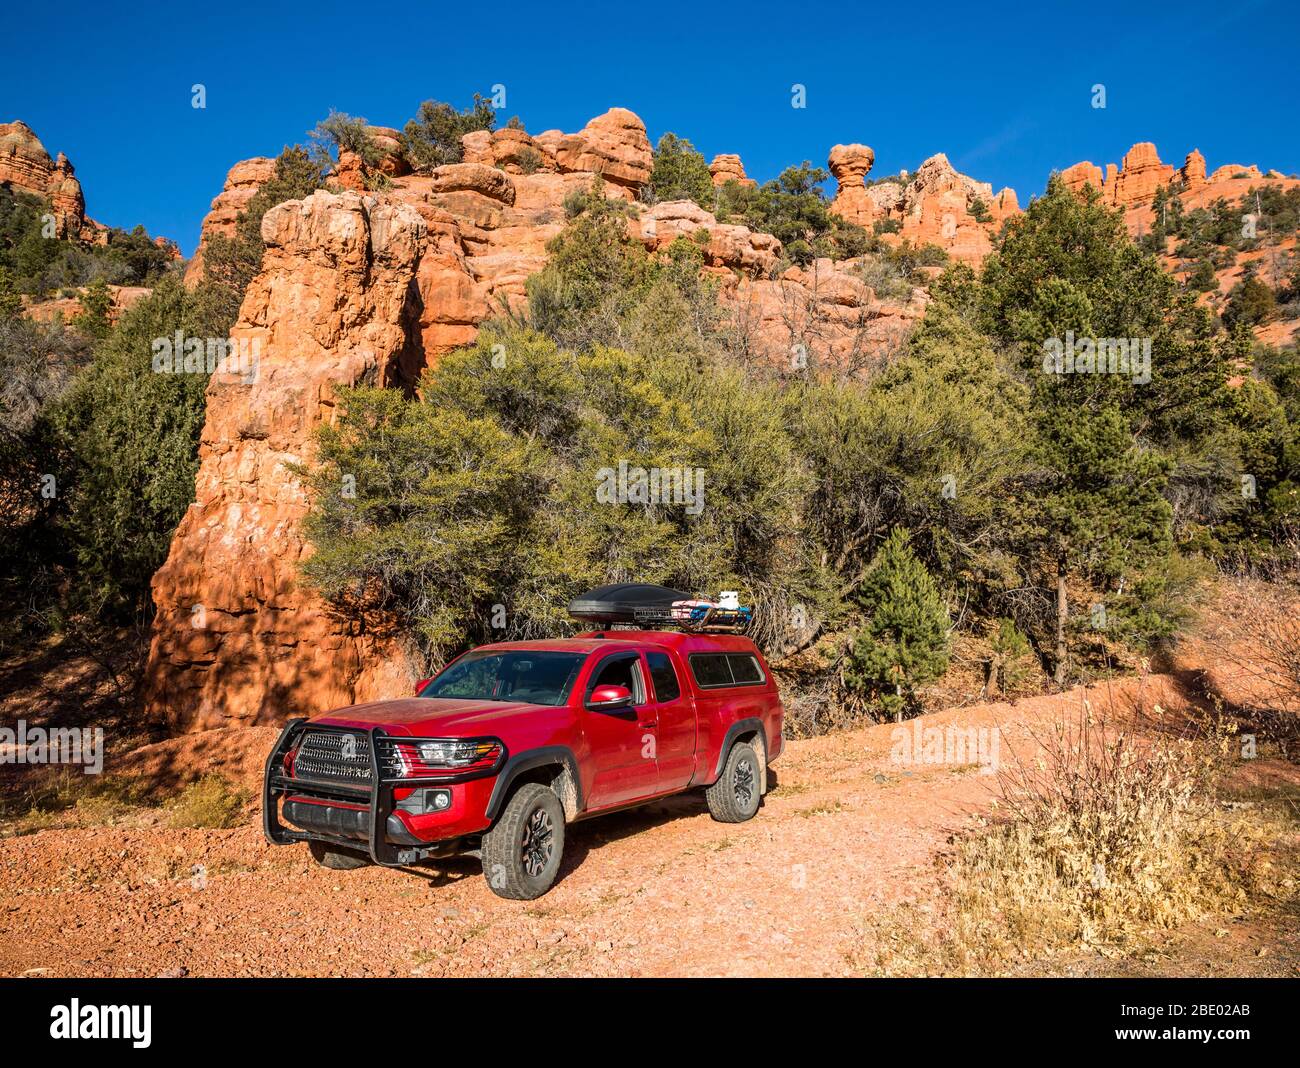 Orange sandstone towers stand above a narrow dirt trail where a red pickup camper is parked. The truck is loaded with camping and overland gear for of Stock Photo